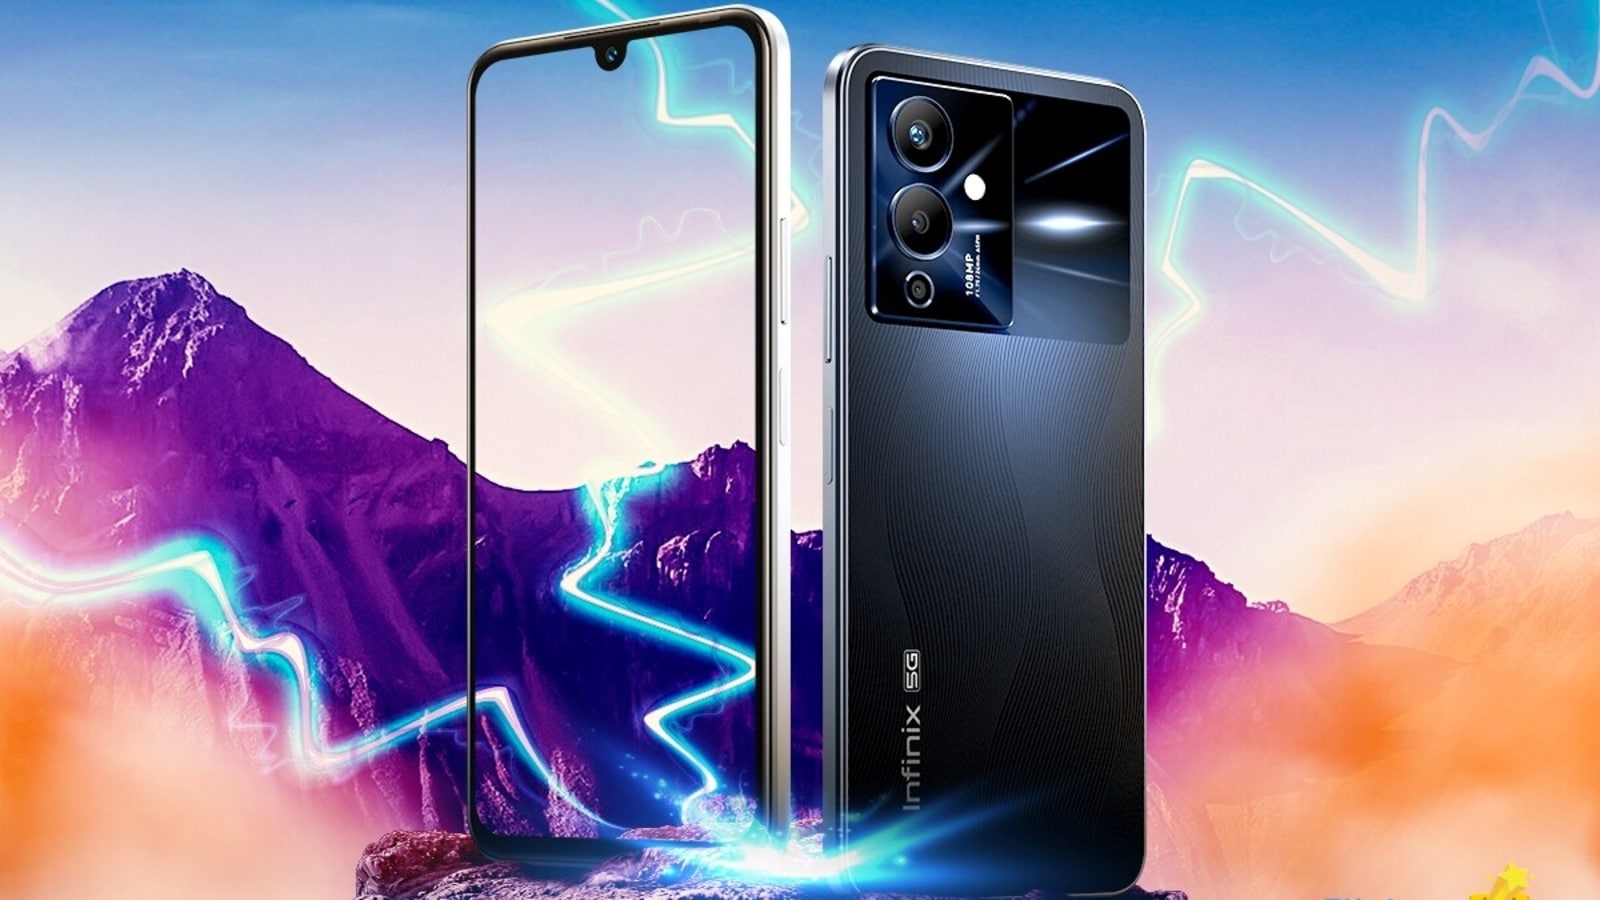 Note 12 pro 5g камера. Infinix Note 12 5g. Note 12 Pro 5g. Смартфон Infinix Note 12 Pro. Infinix Note 5.